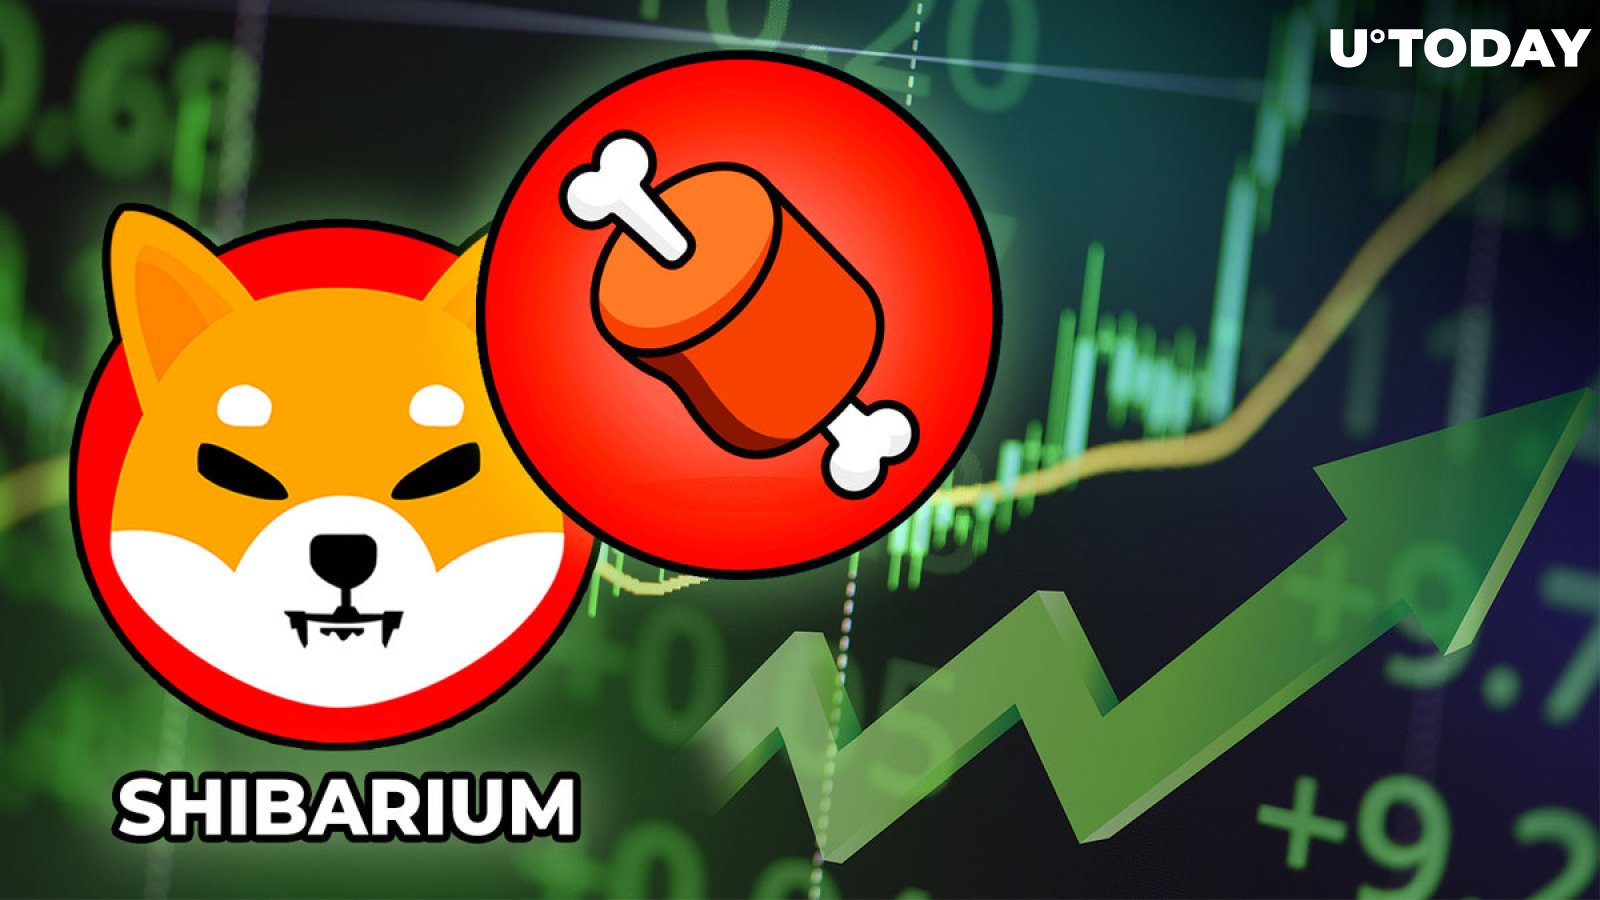 Shiba Inu's Shibarium Surges to All-Time High With 26 Million BONE Tokens Staked